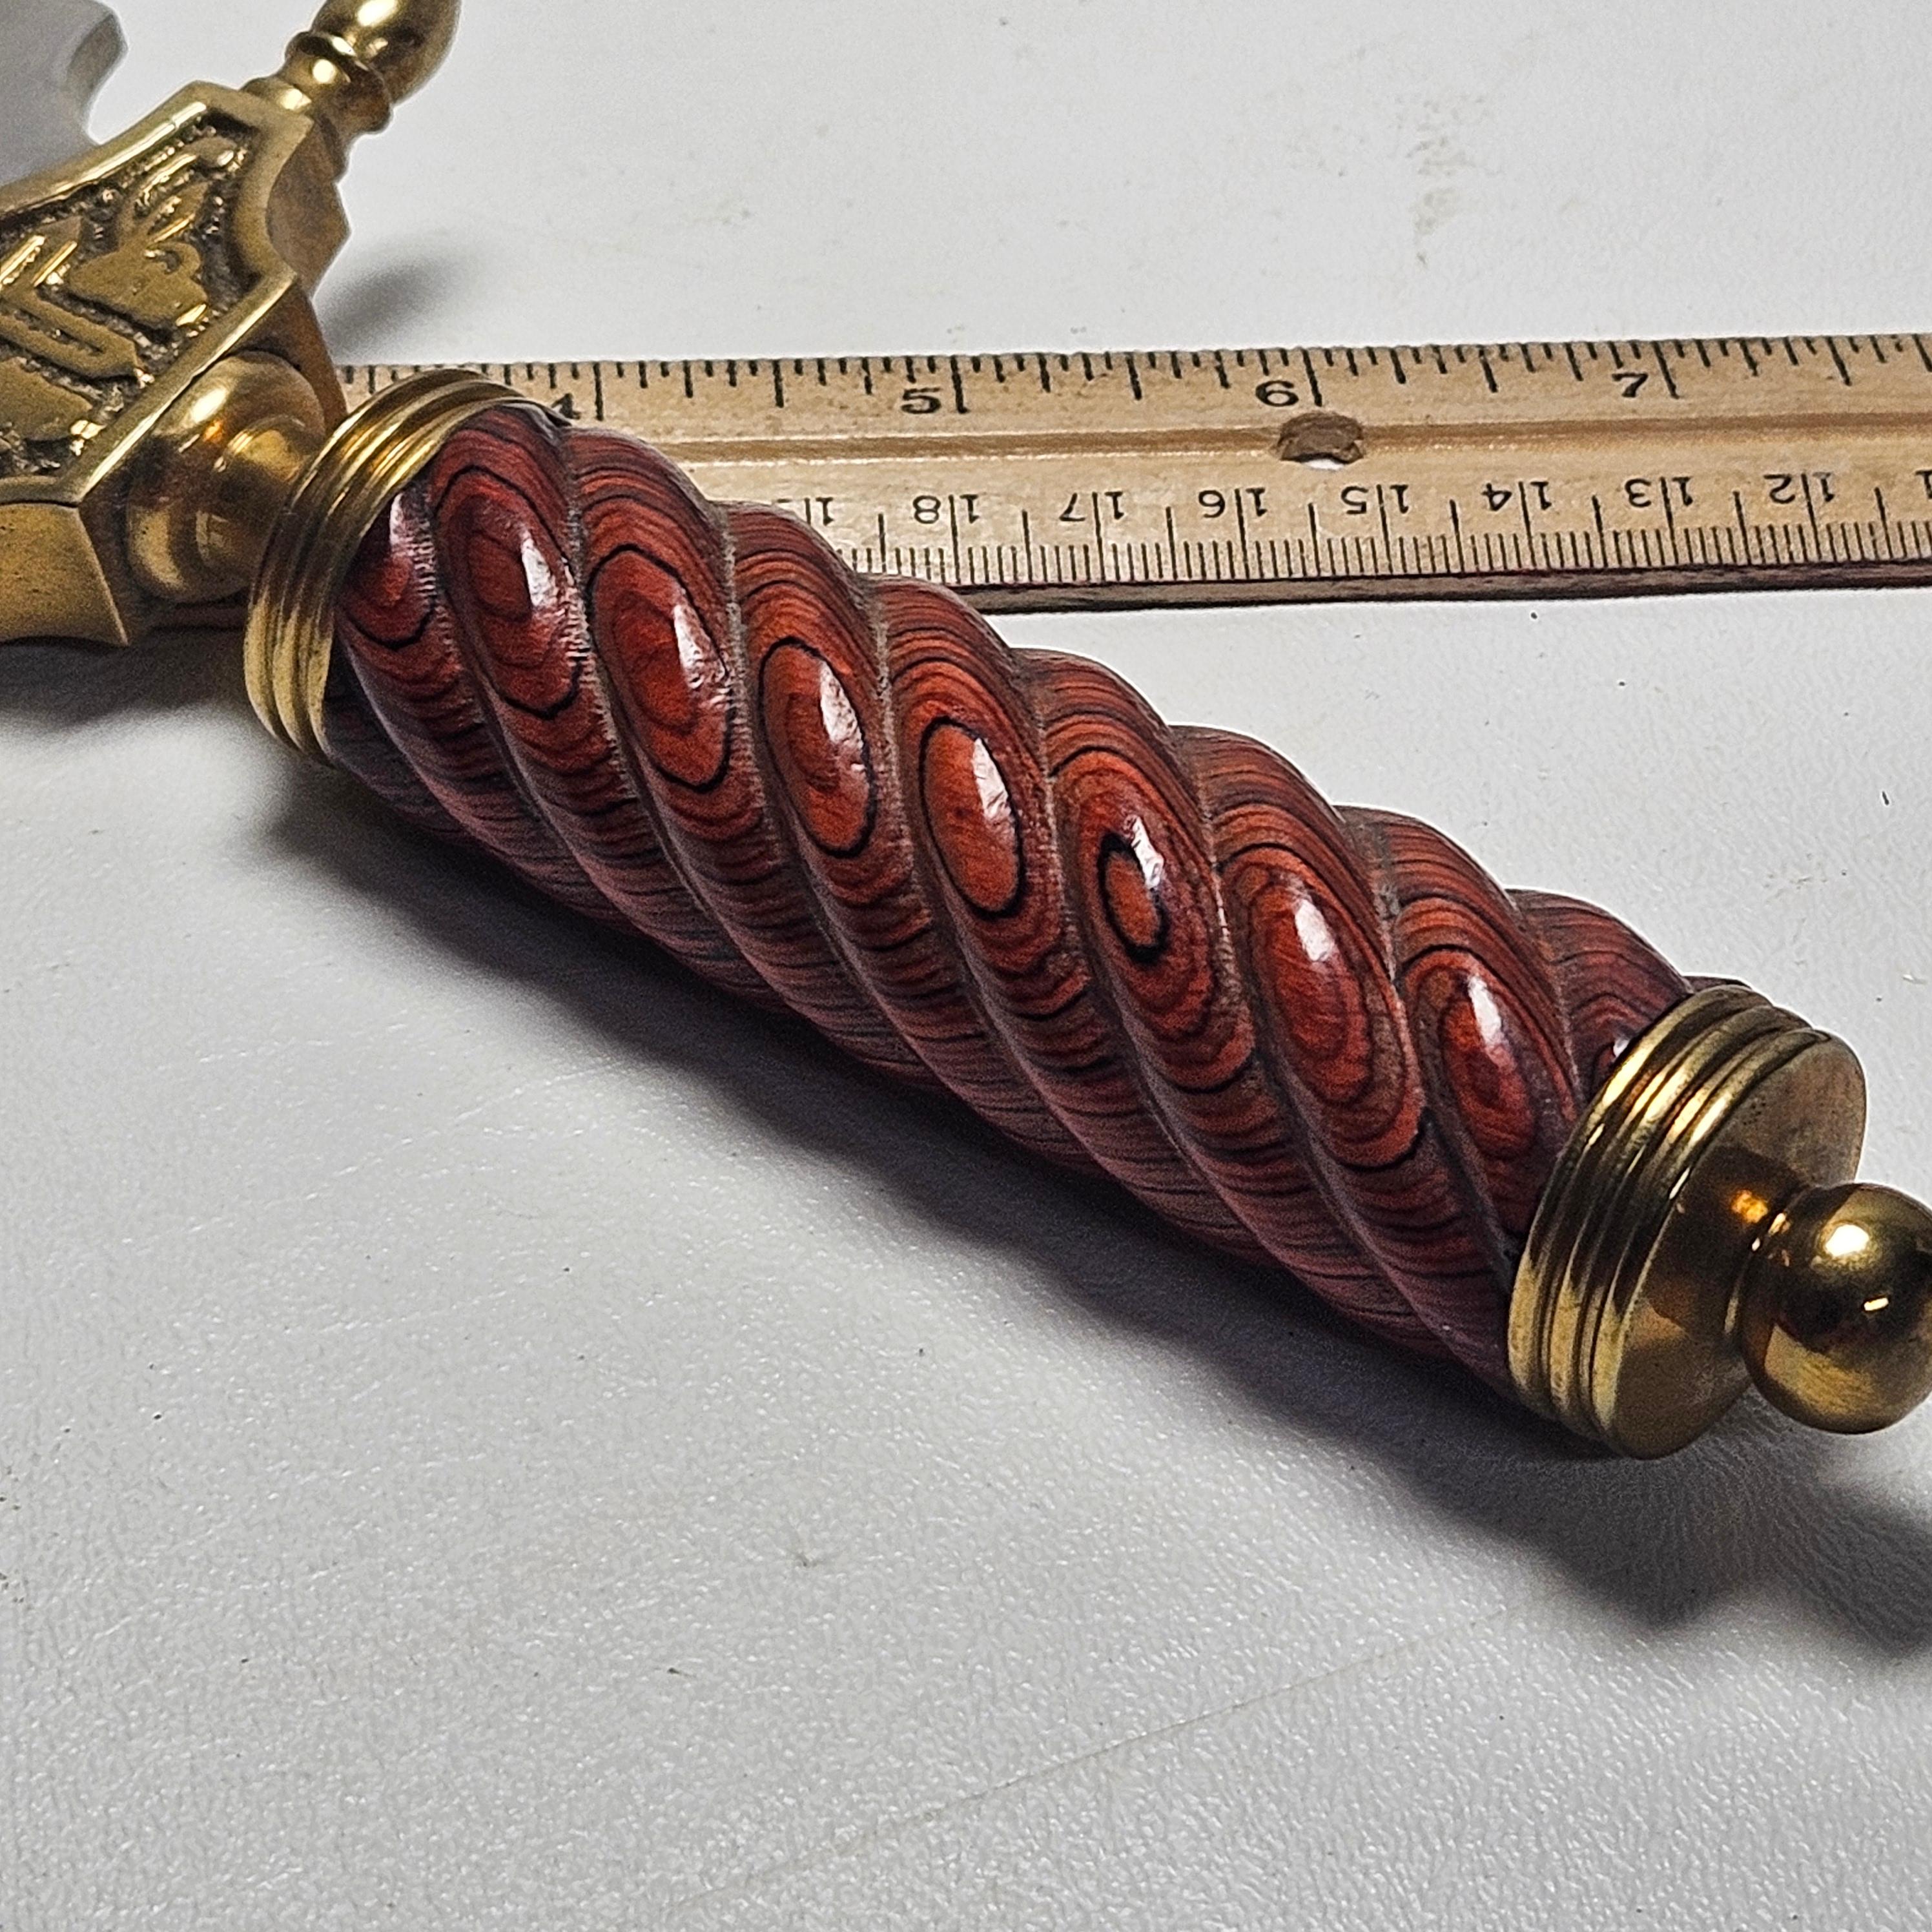 Medieval Warrior Style Dagger with Sheath